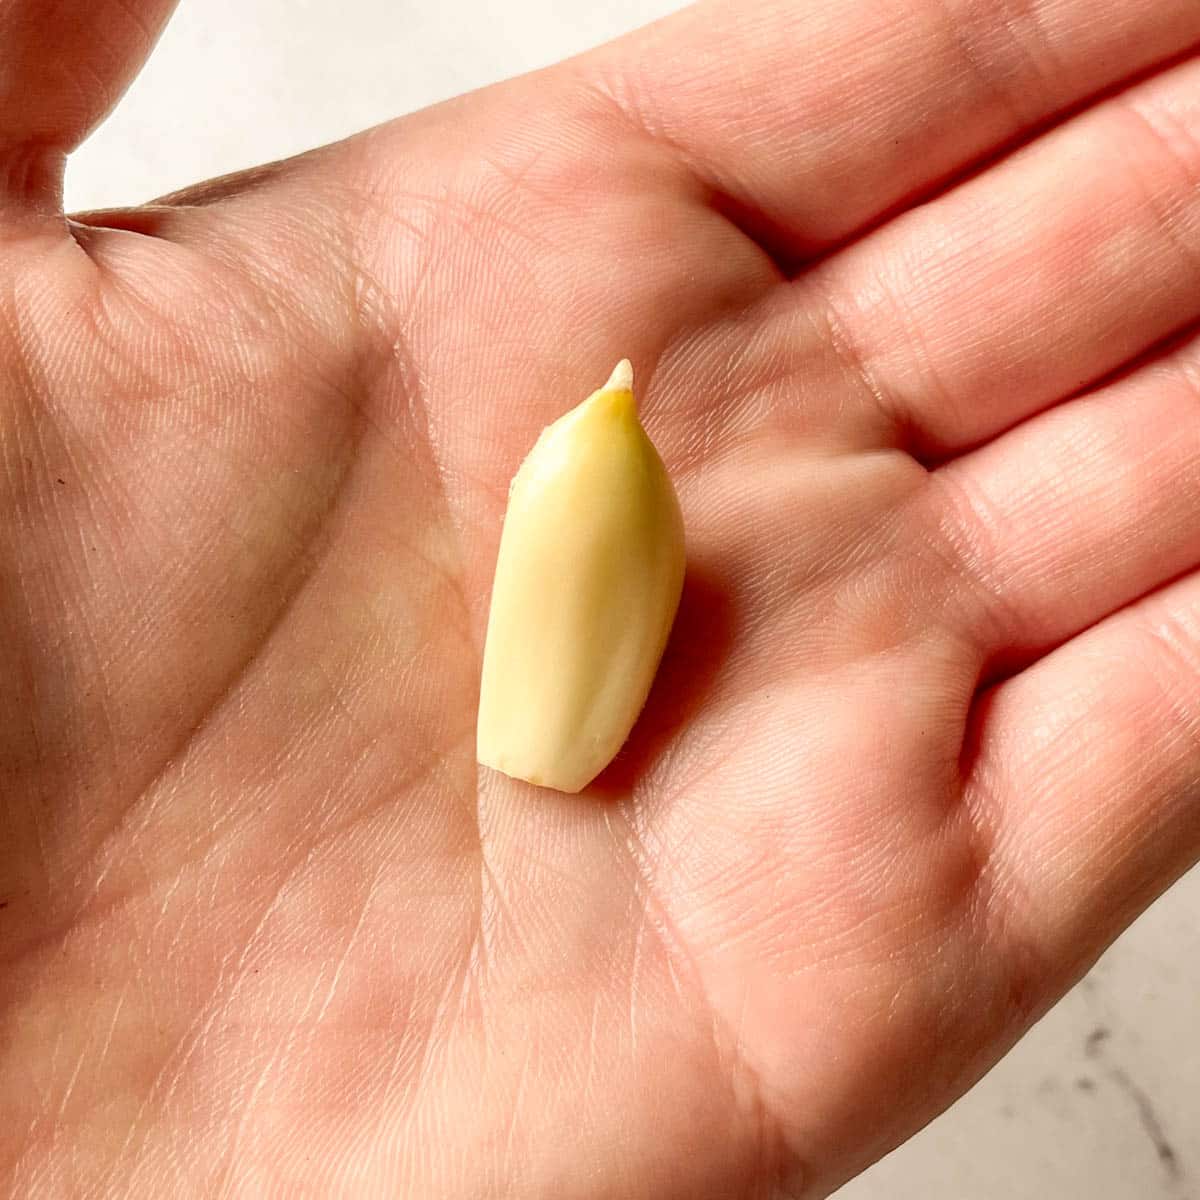 A clove of garlic with a small green stem at its top is shown in the palm of the author's hand.